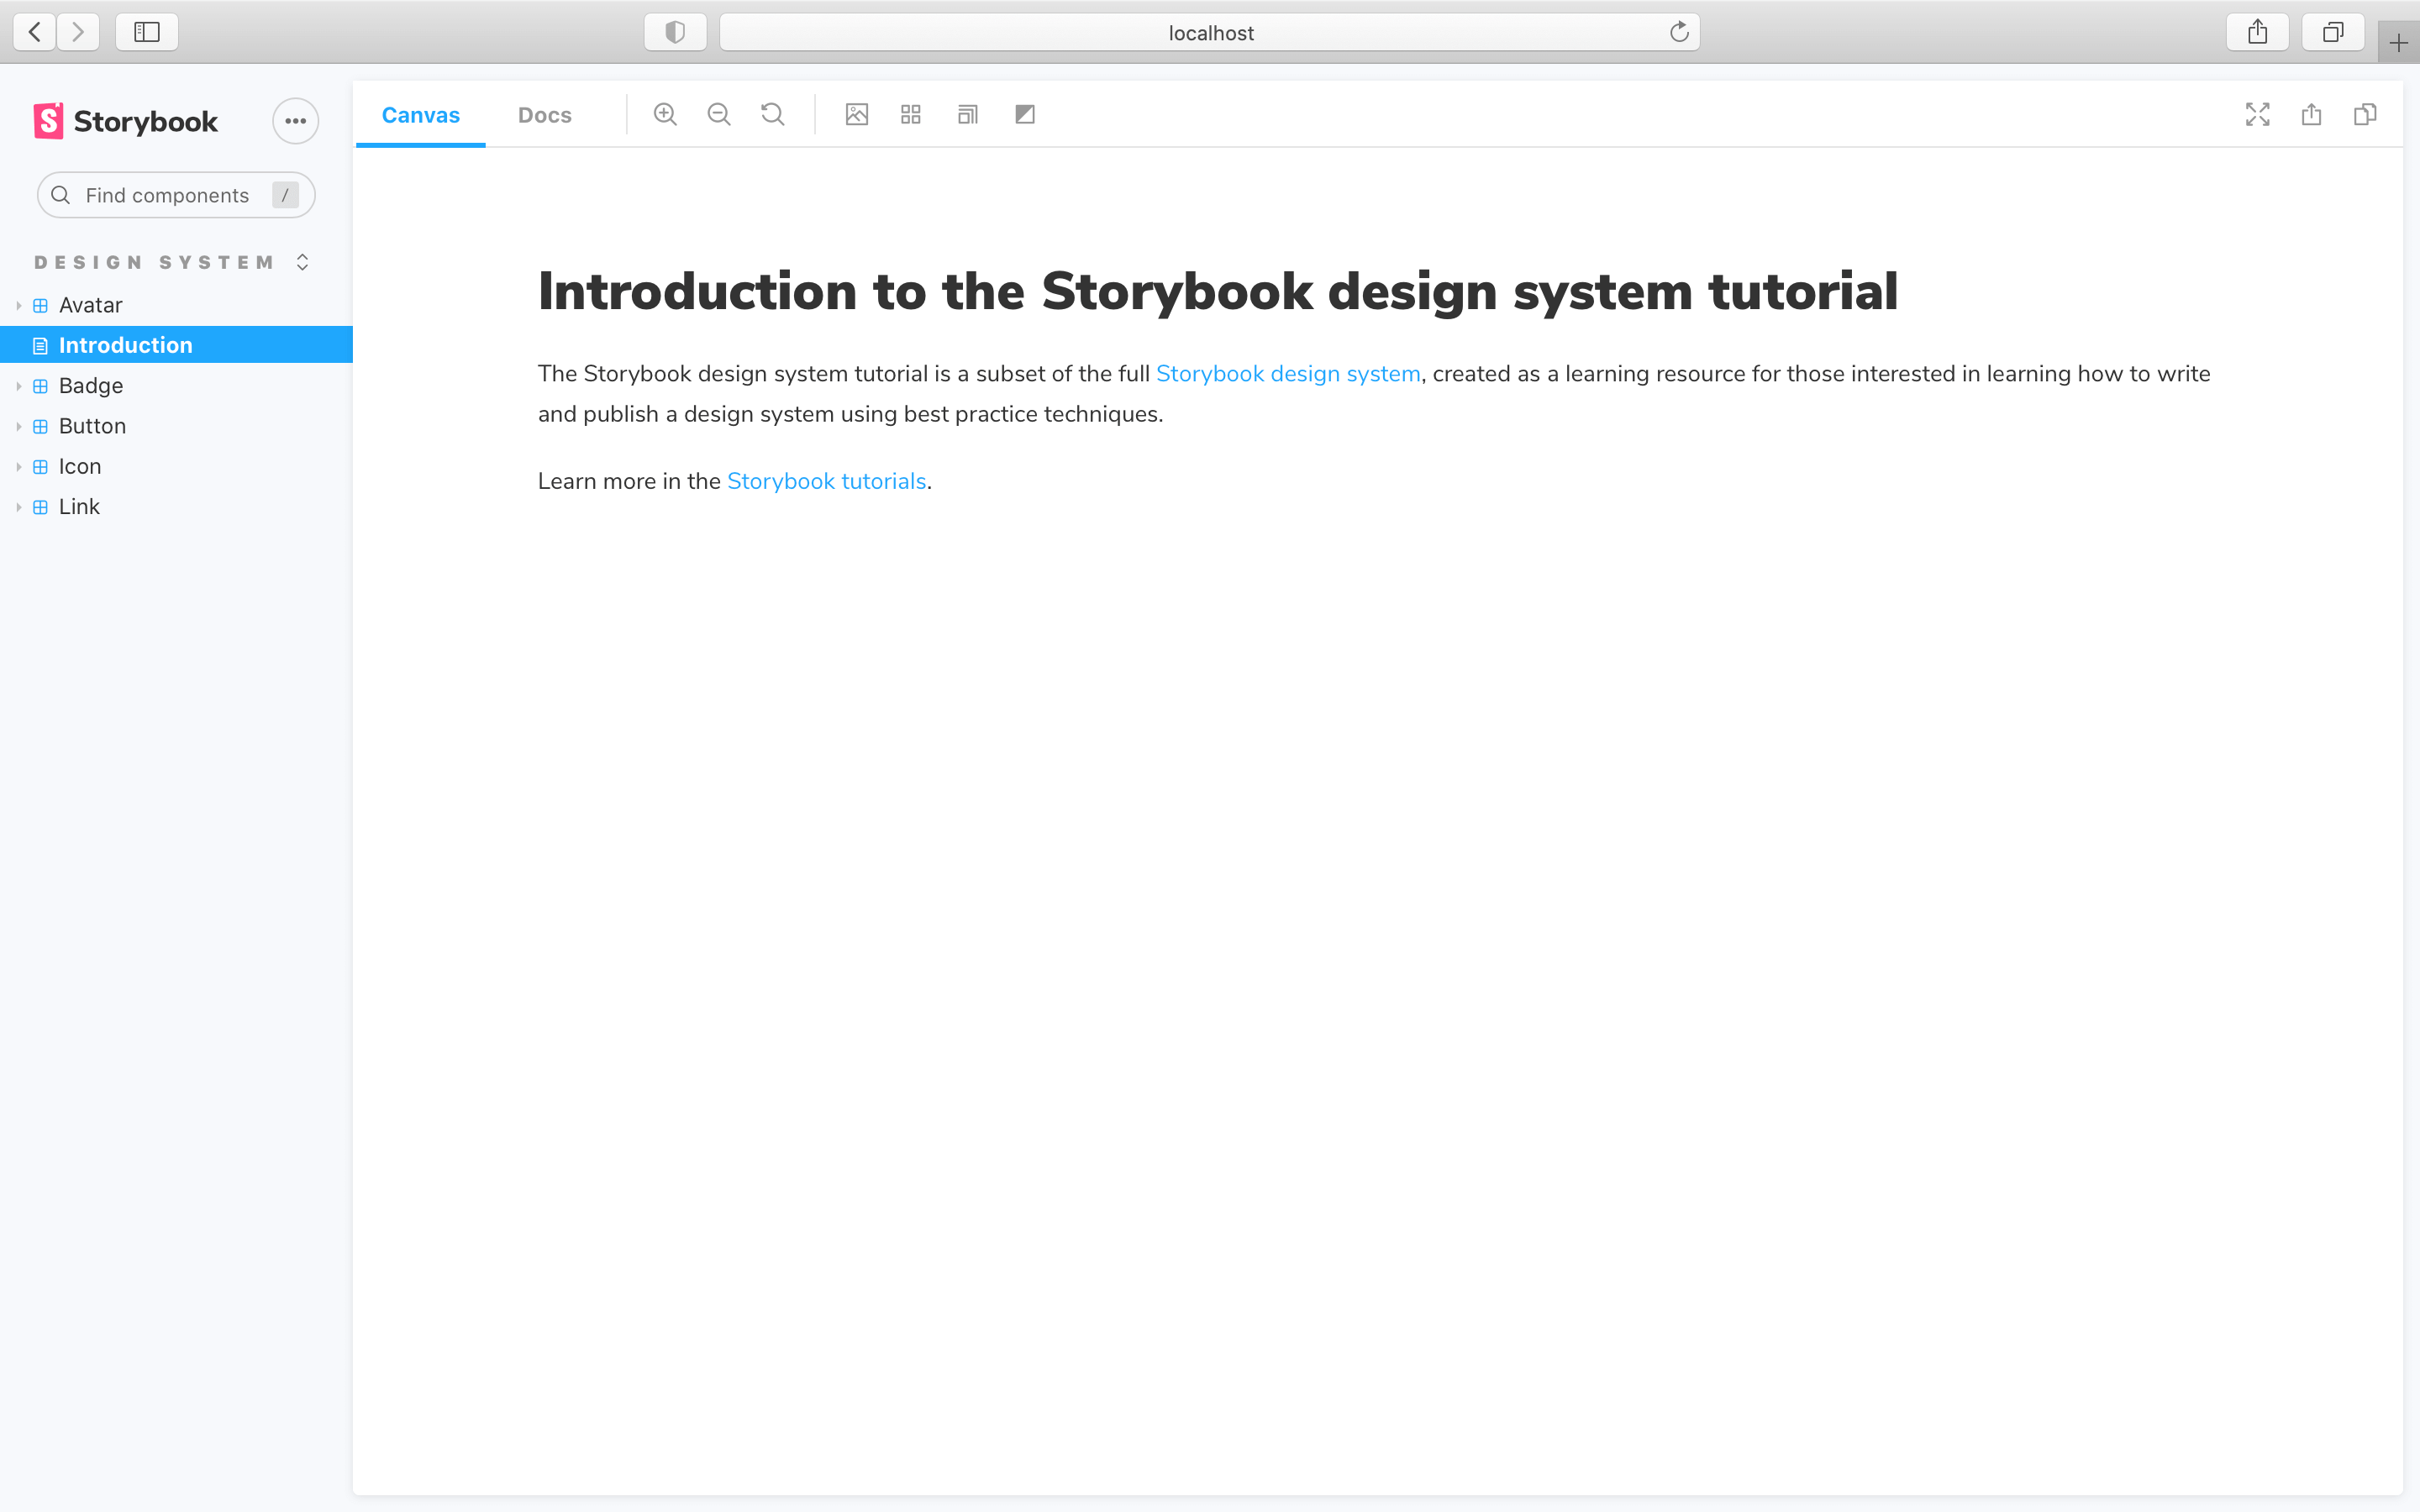 Storybook docs with introduction page, unsorted